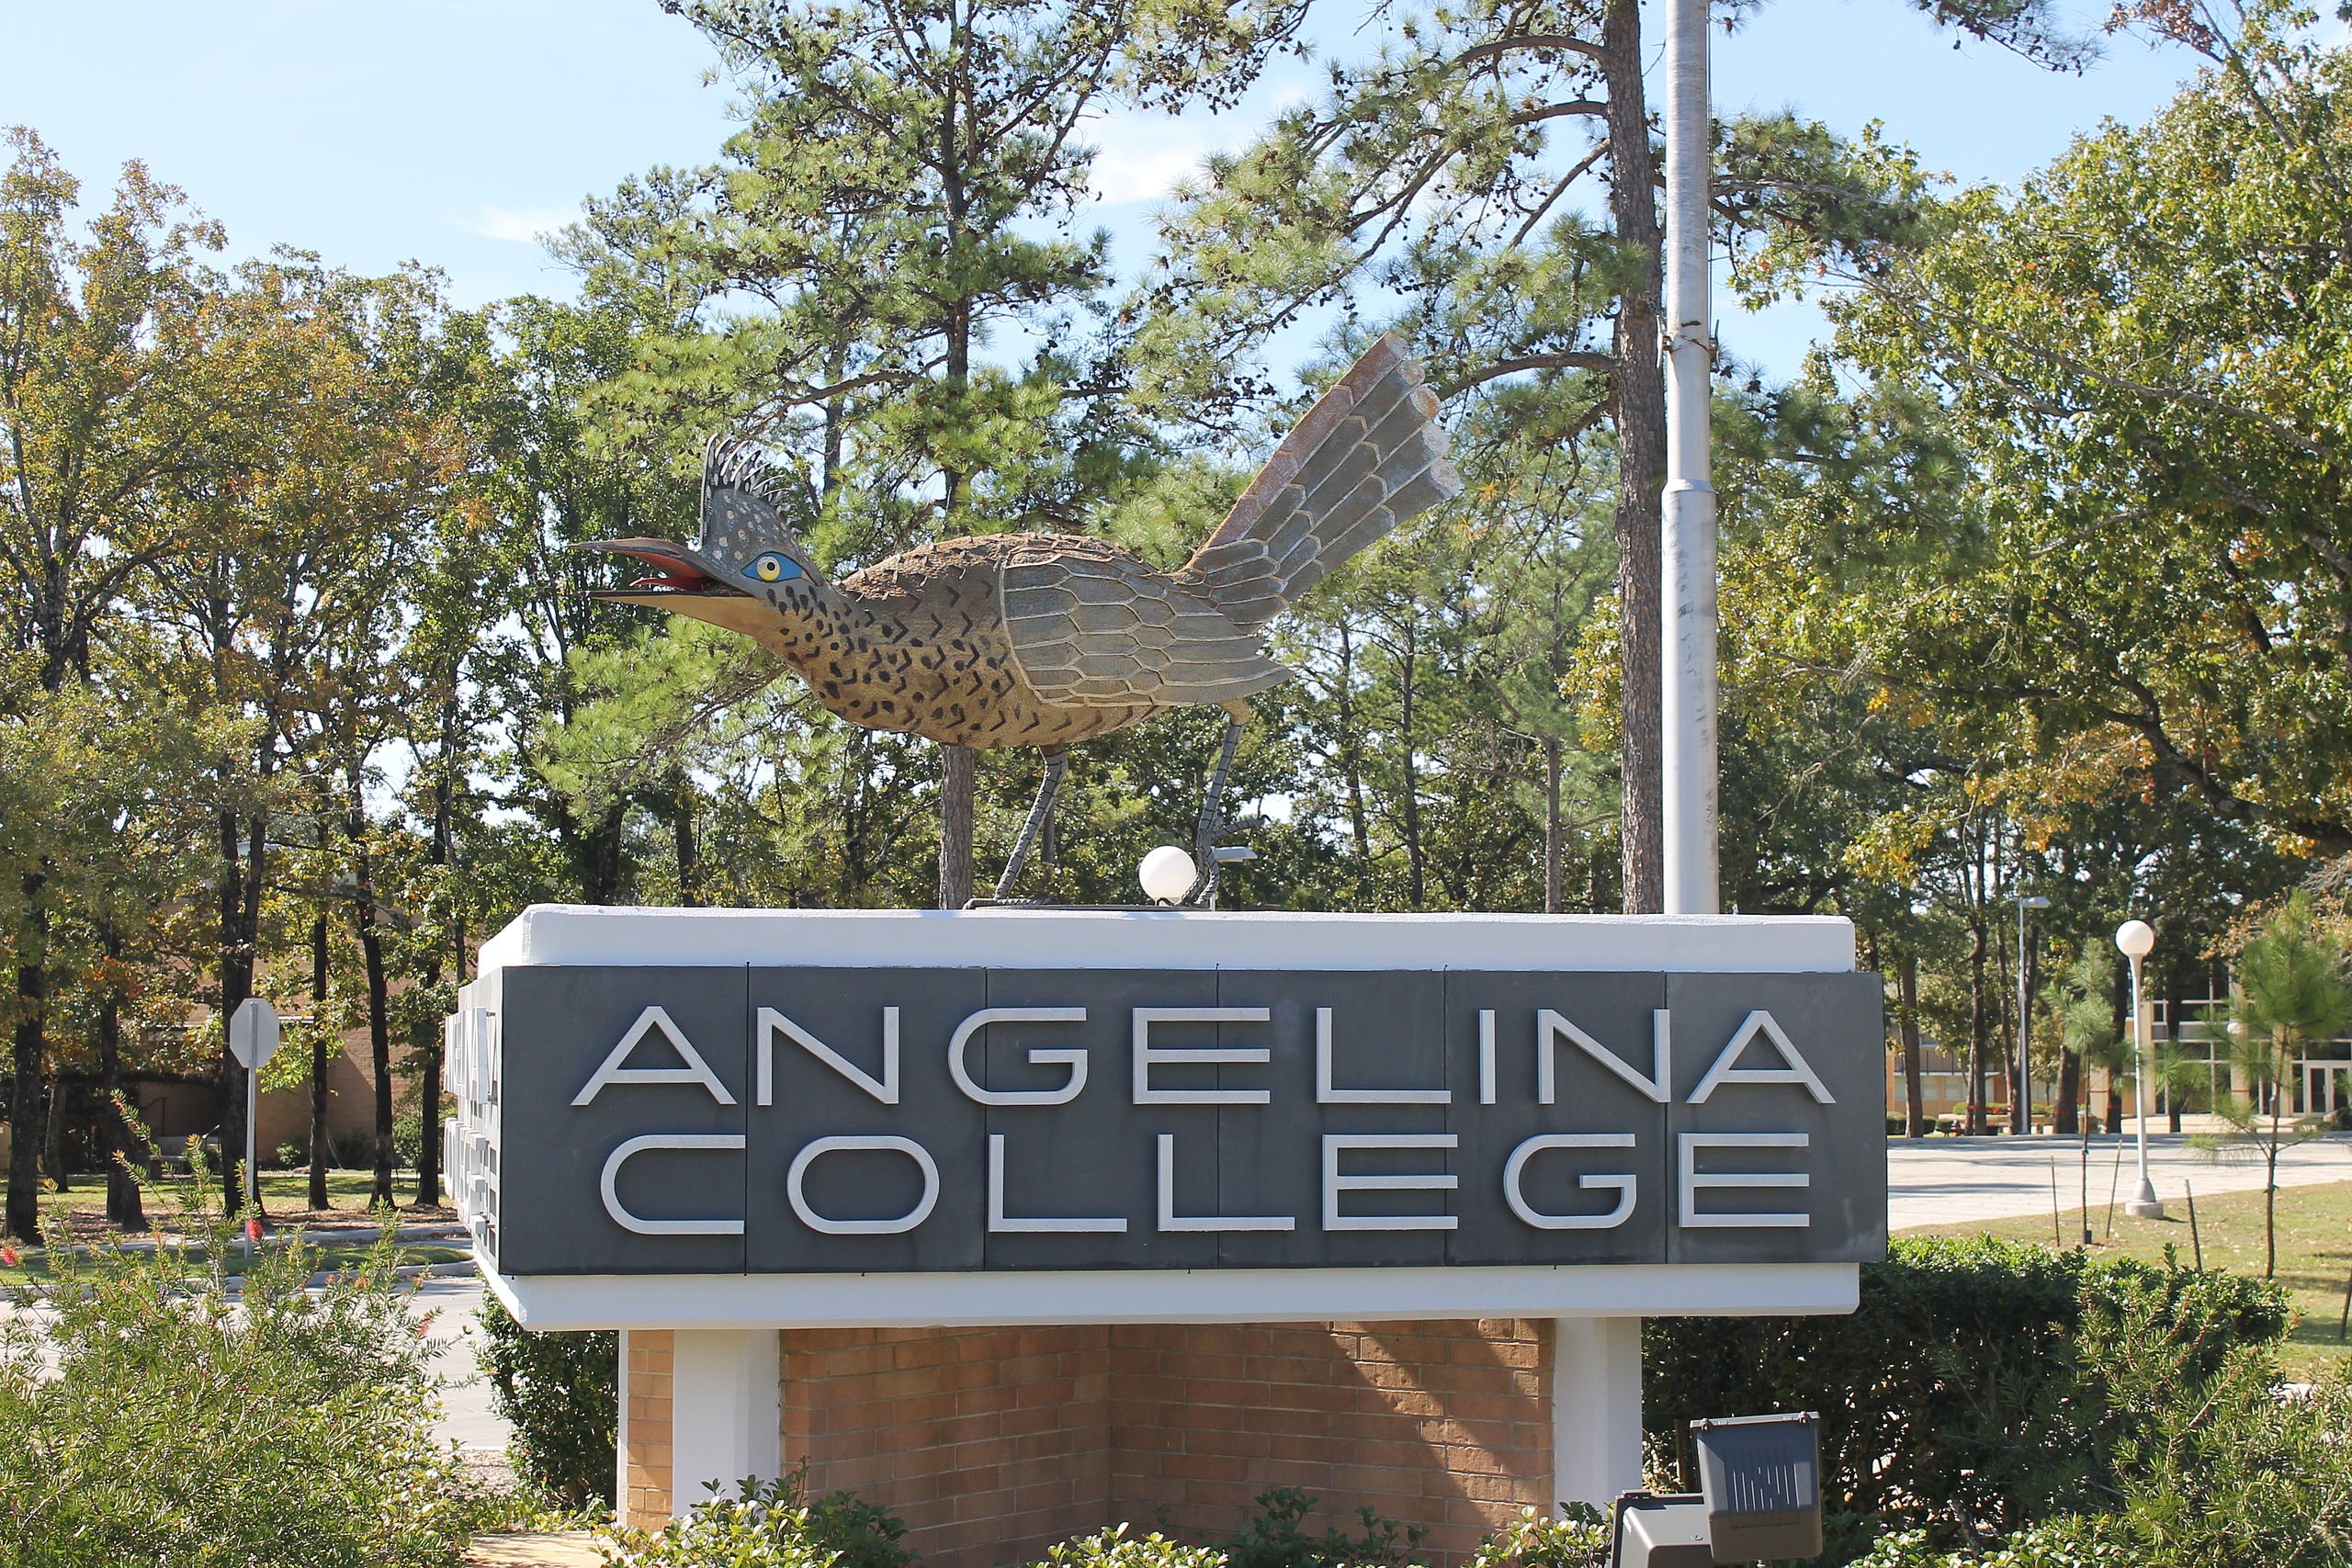 Photo of Angelina College sign